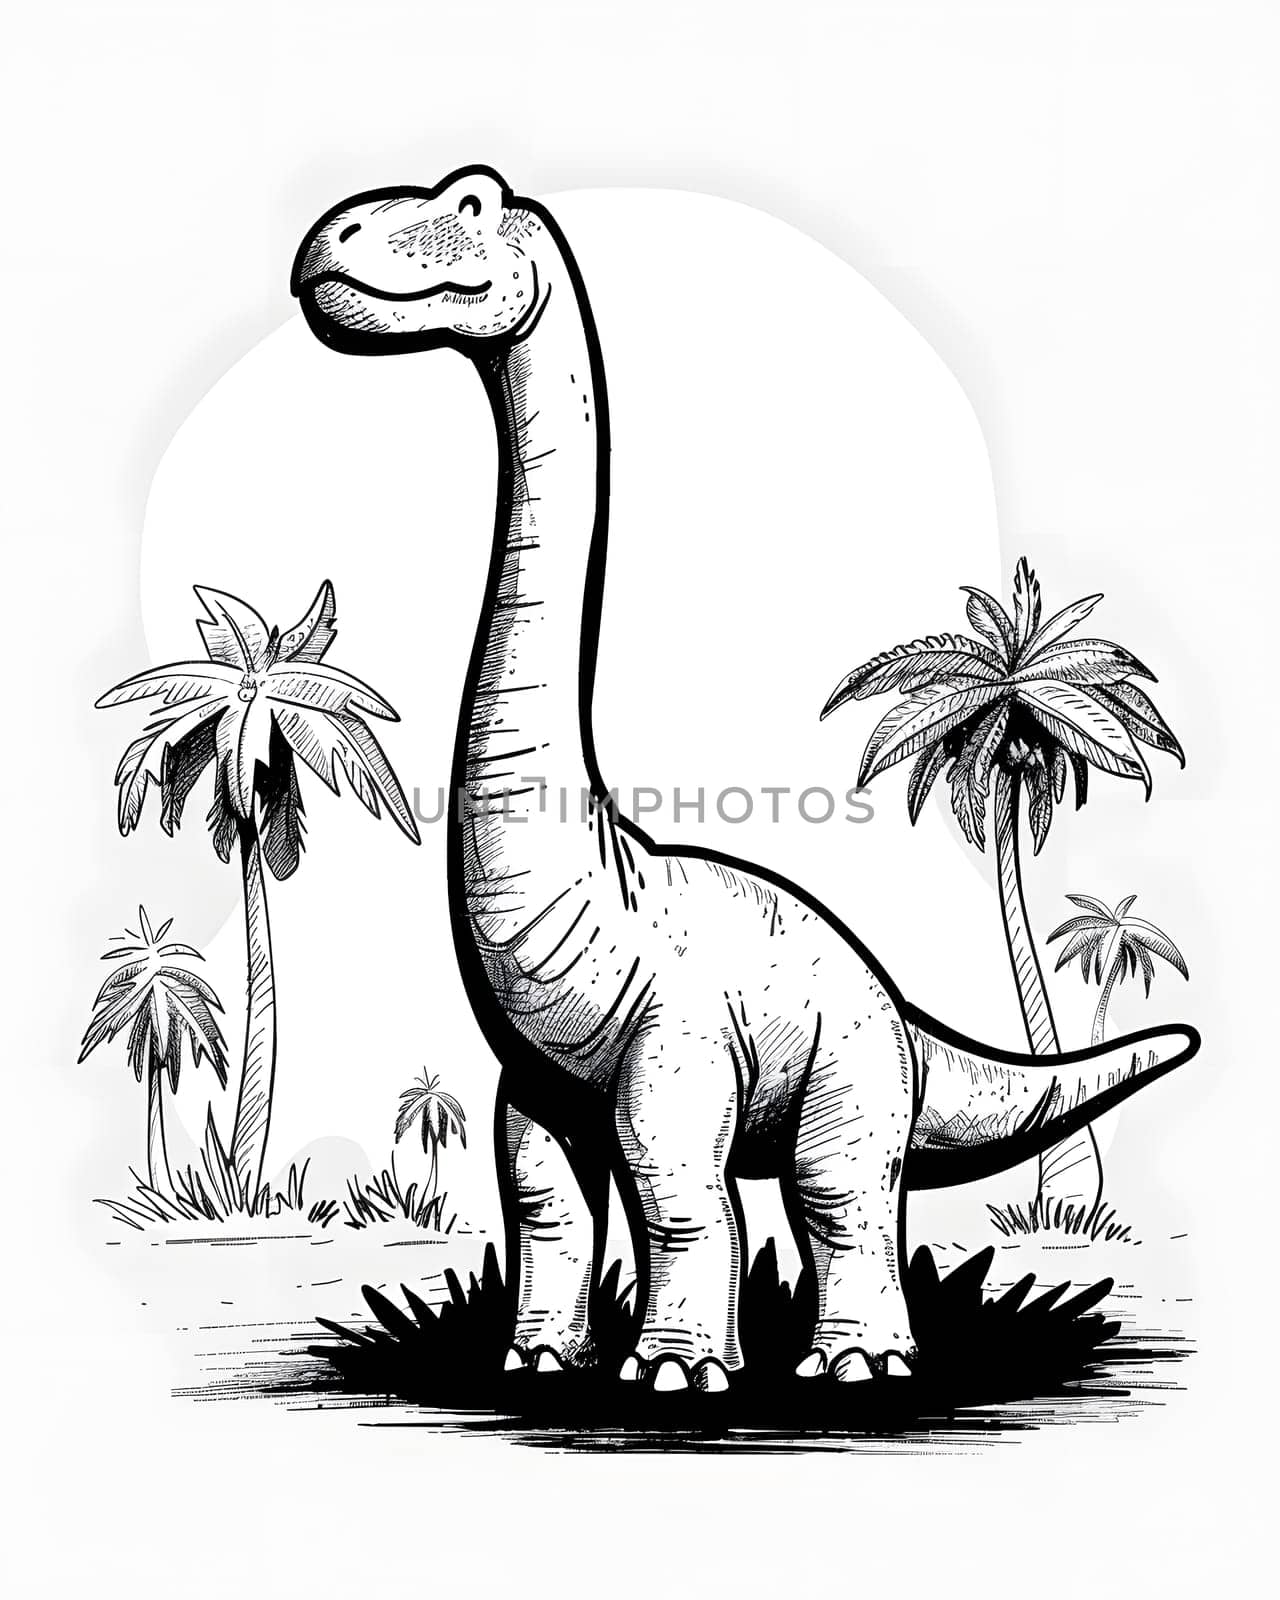 A cartoon drawing of a dinosaur surrounded by palm trees, showcasing the ancient nature of vertebrate organisms before their extinction